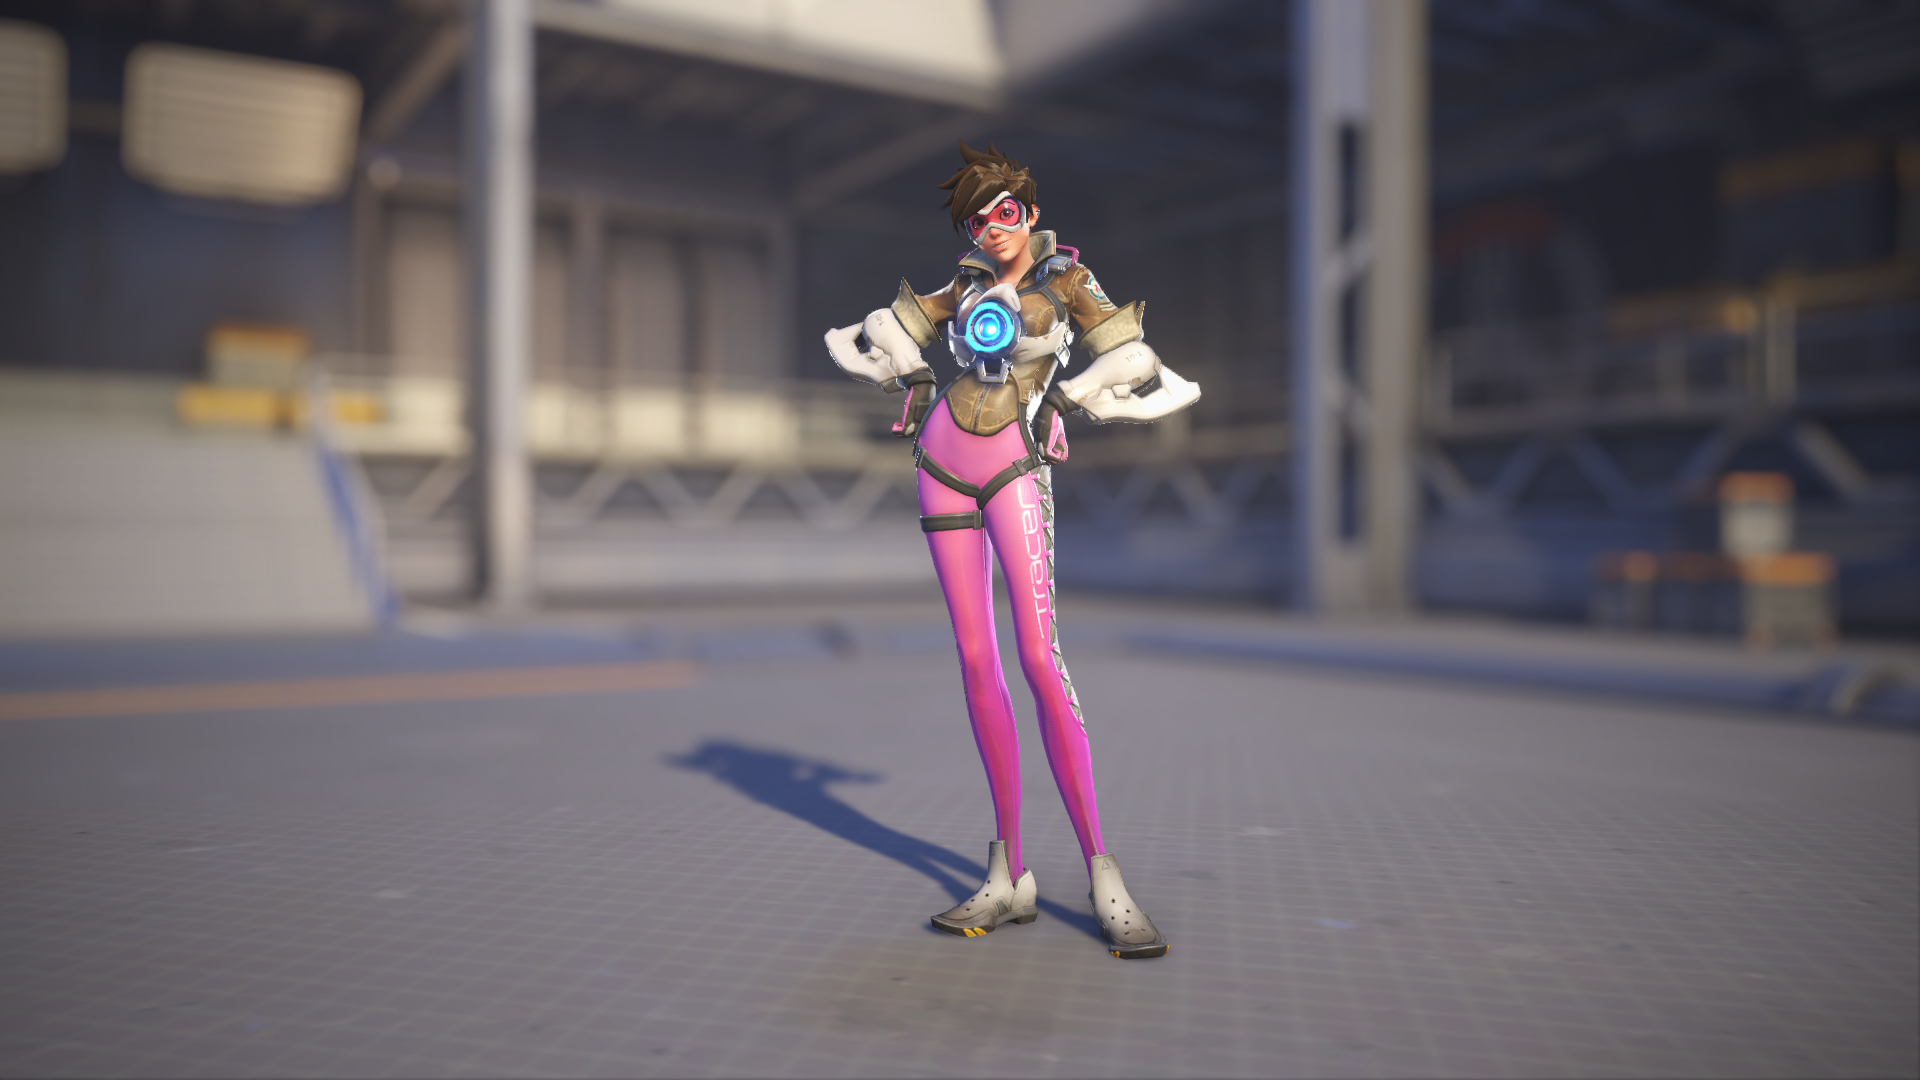 Tracer models her Hot Pink skin in Overwatch 2.